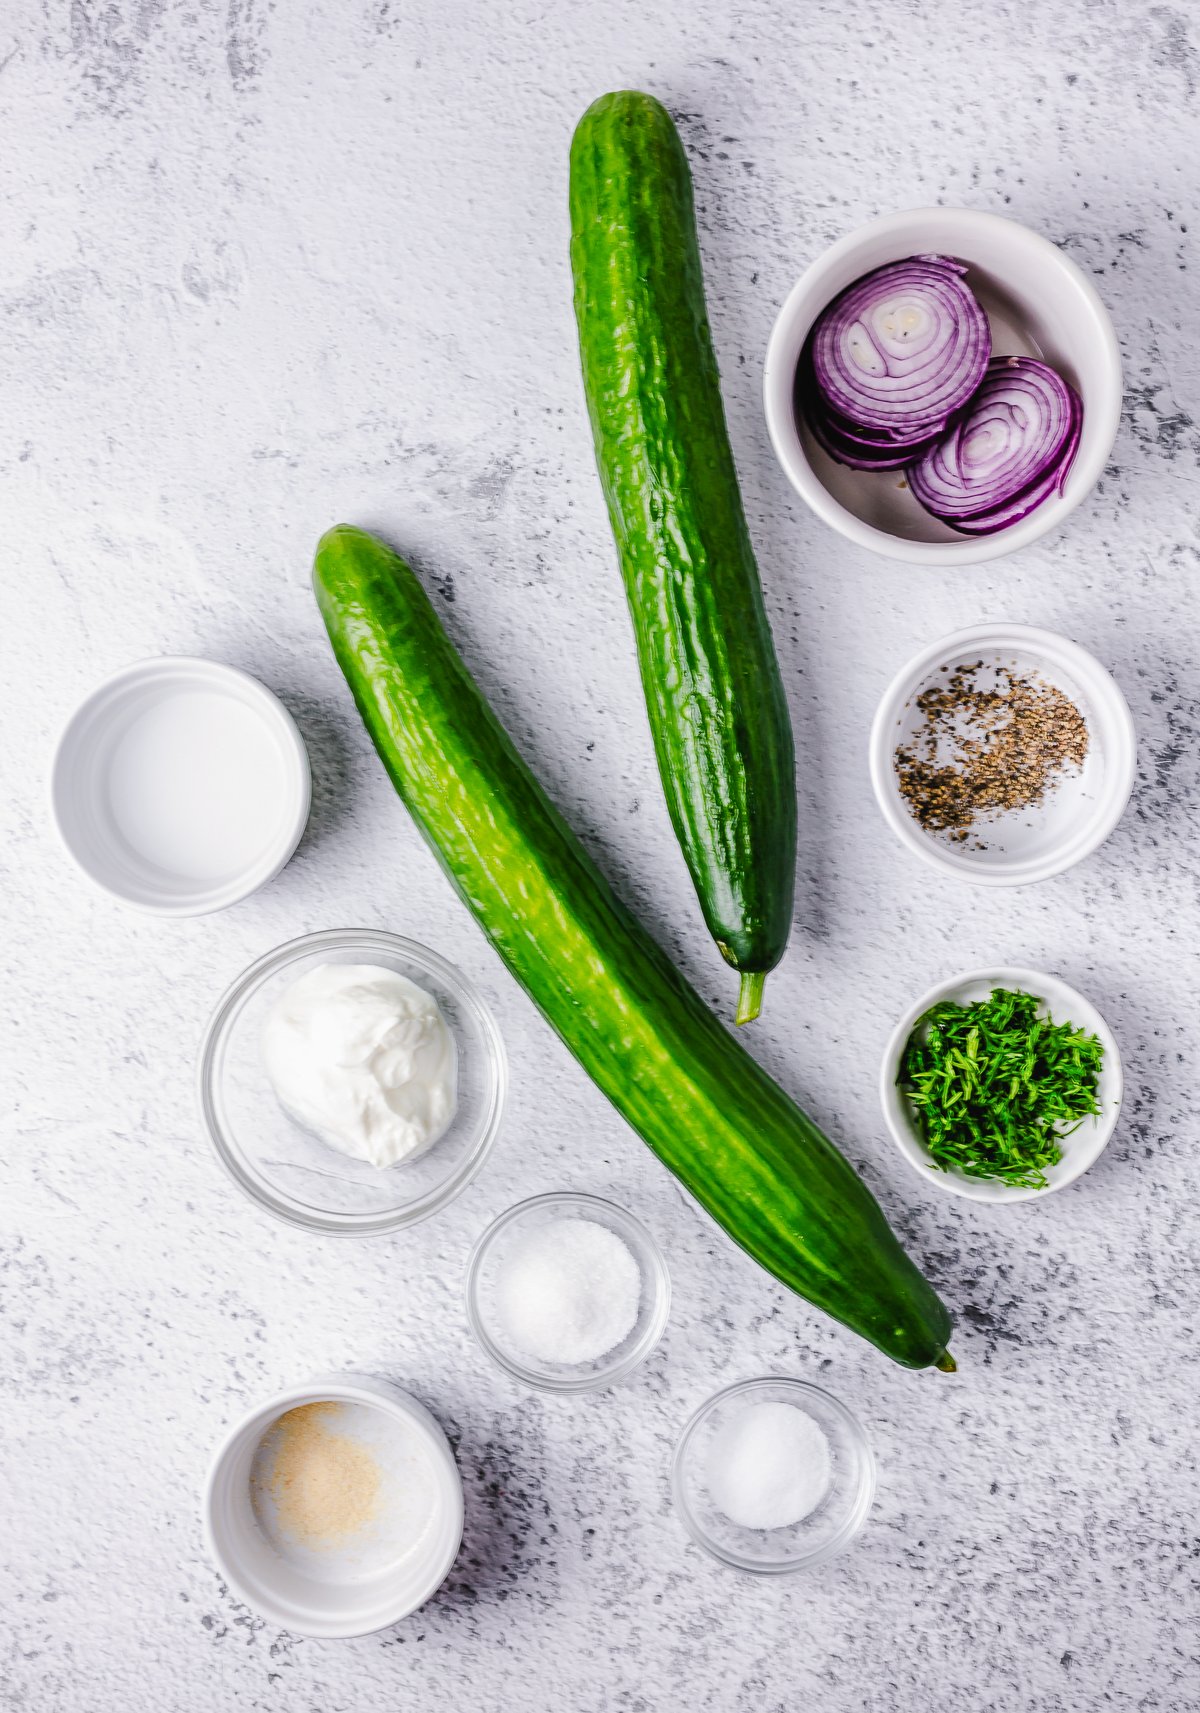 Ingredients needed to make a Dill Cucumber Salad